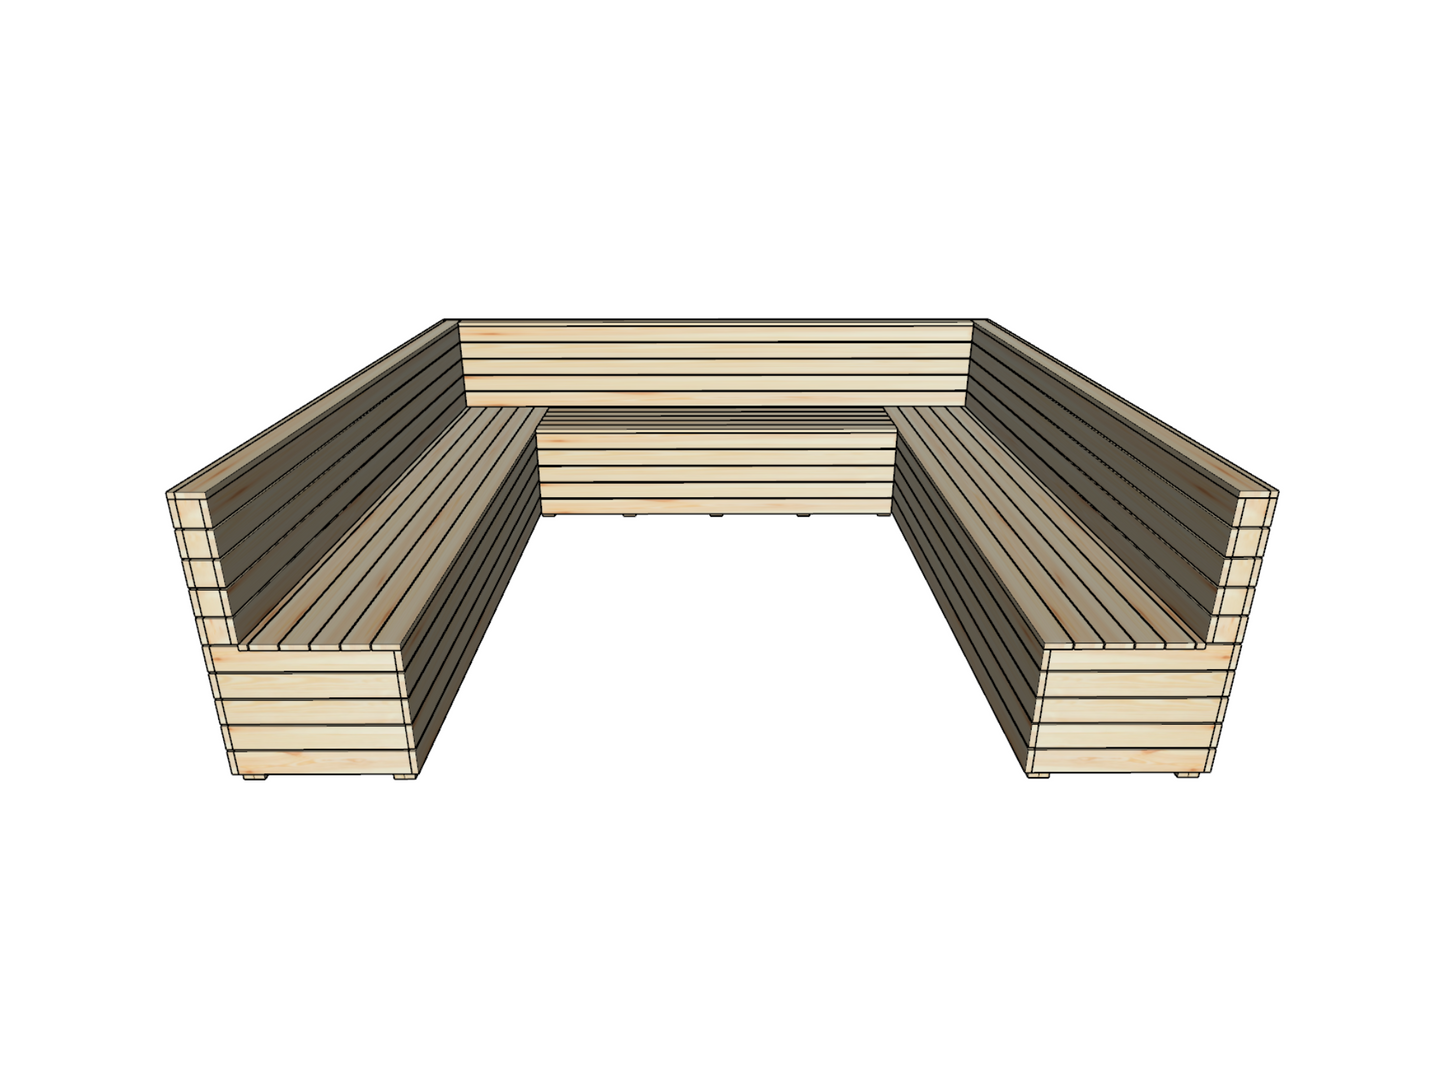 Outdoor U-Shaped Bench - Step-By-Step DIY Construction Guide and Materials List || 3.2m x 3m (10'6" x 9'11")